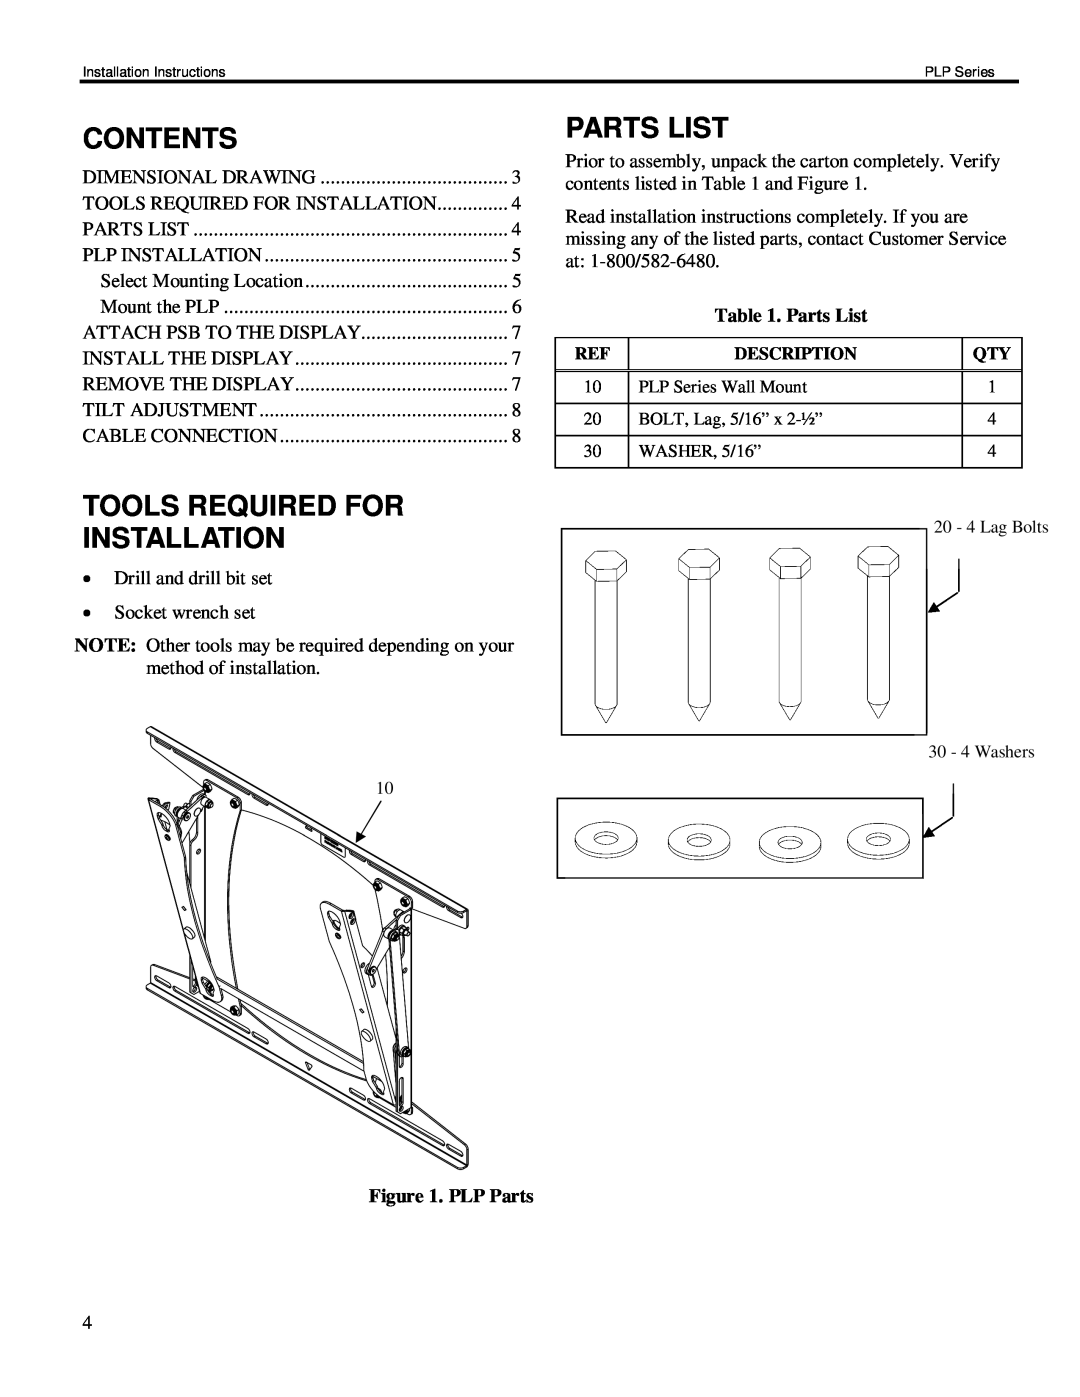 Chief Manufacturing PLP Series installation instructions Contents, Tools Required For Installation, Parts List, PLP Parts 